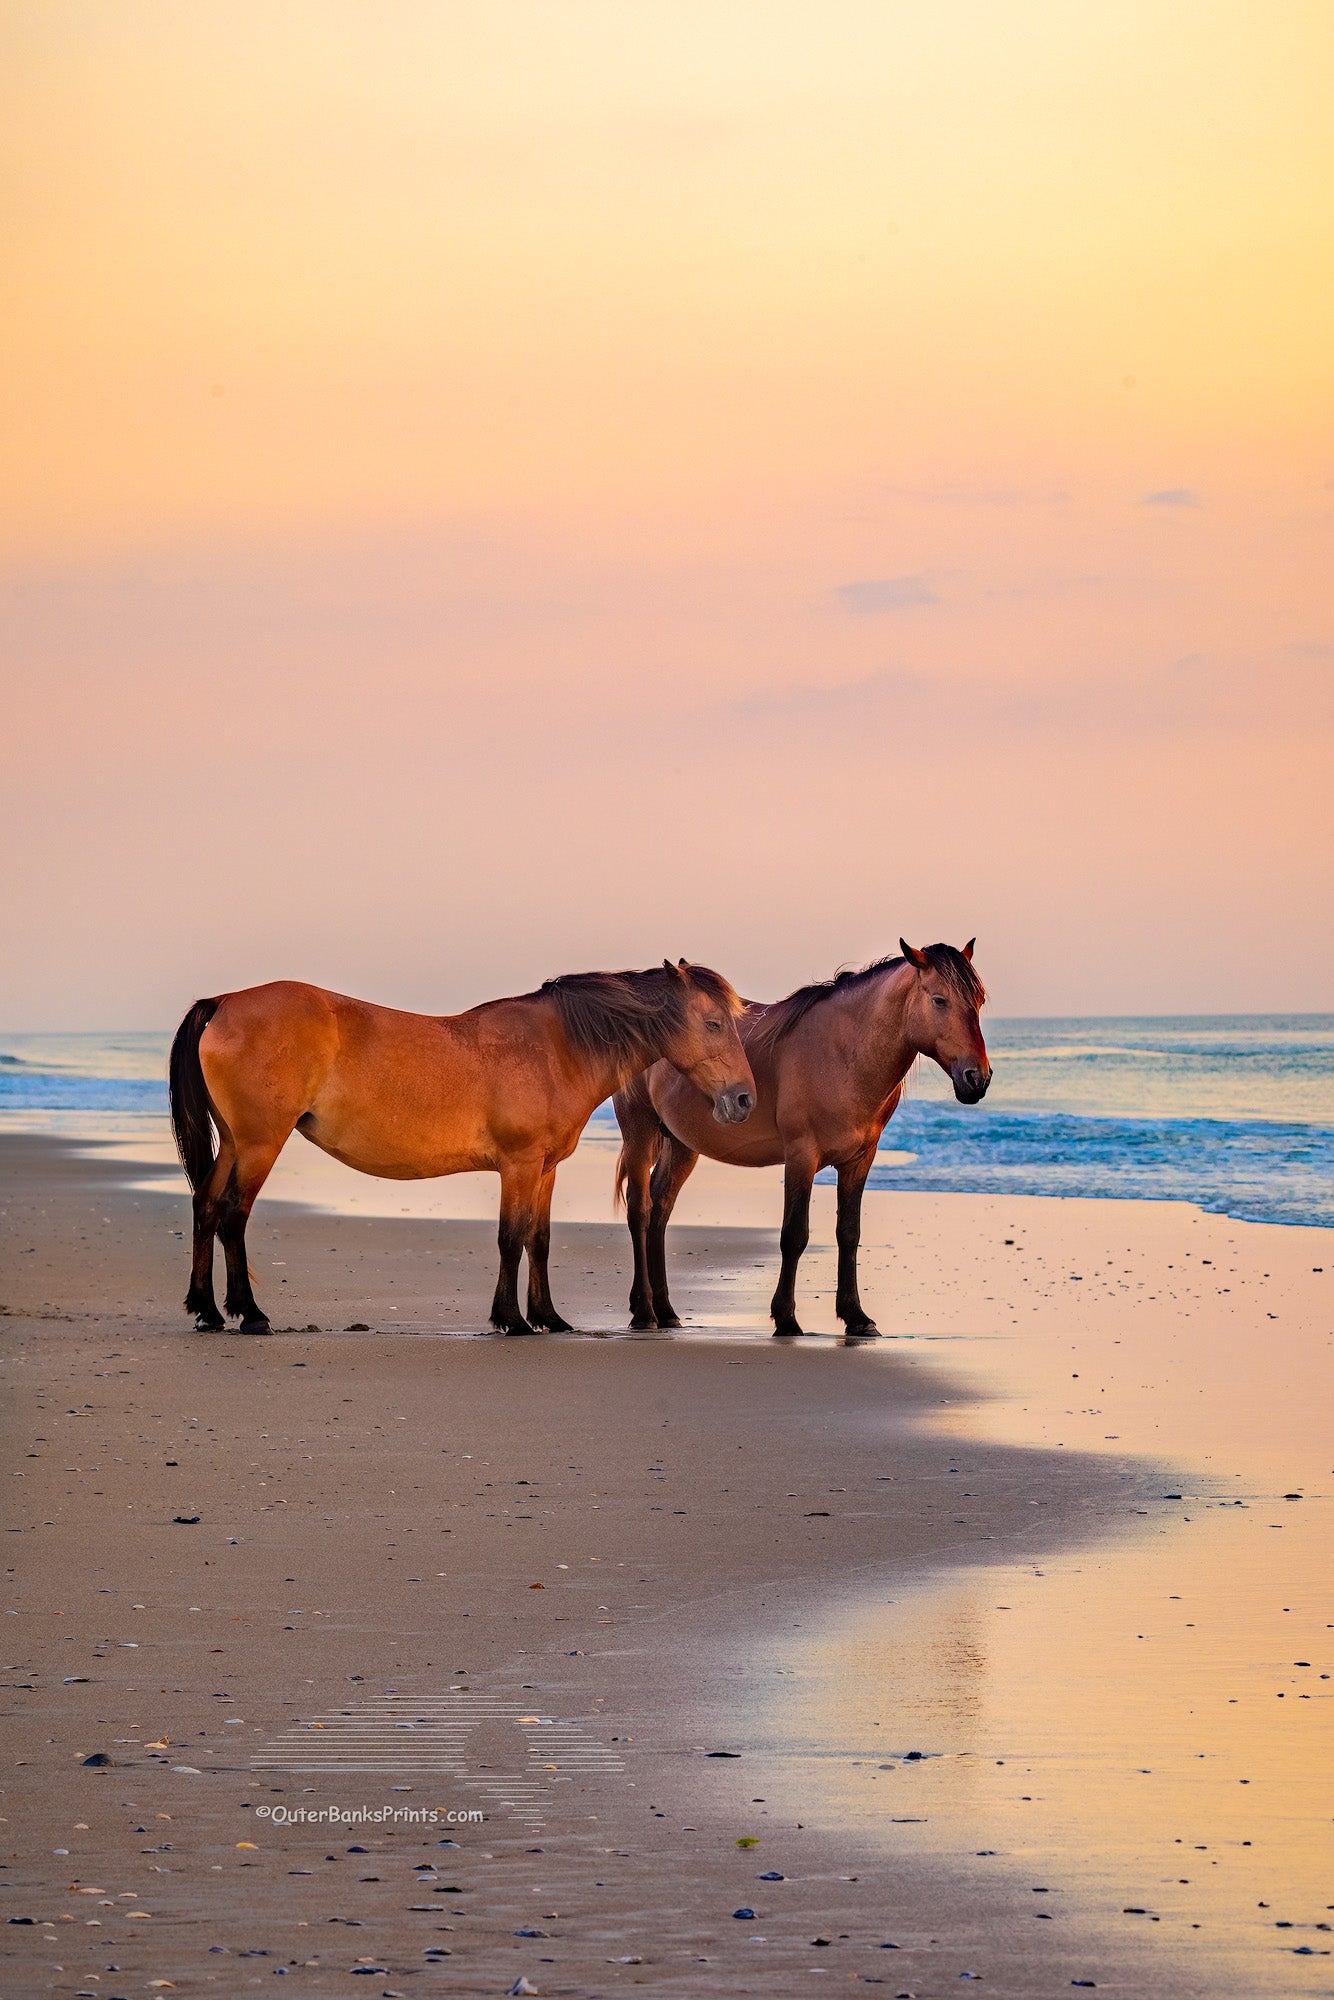 To wild horse is on the beach at sunrise on Carova Beach, Outer Banks of North Carolina